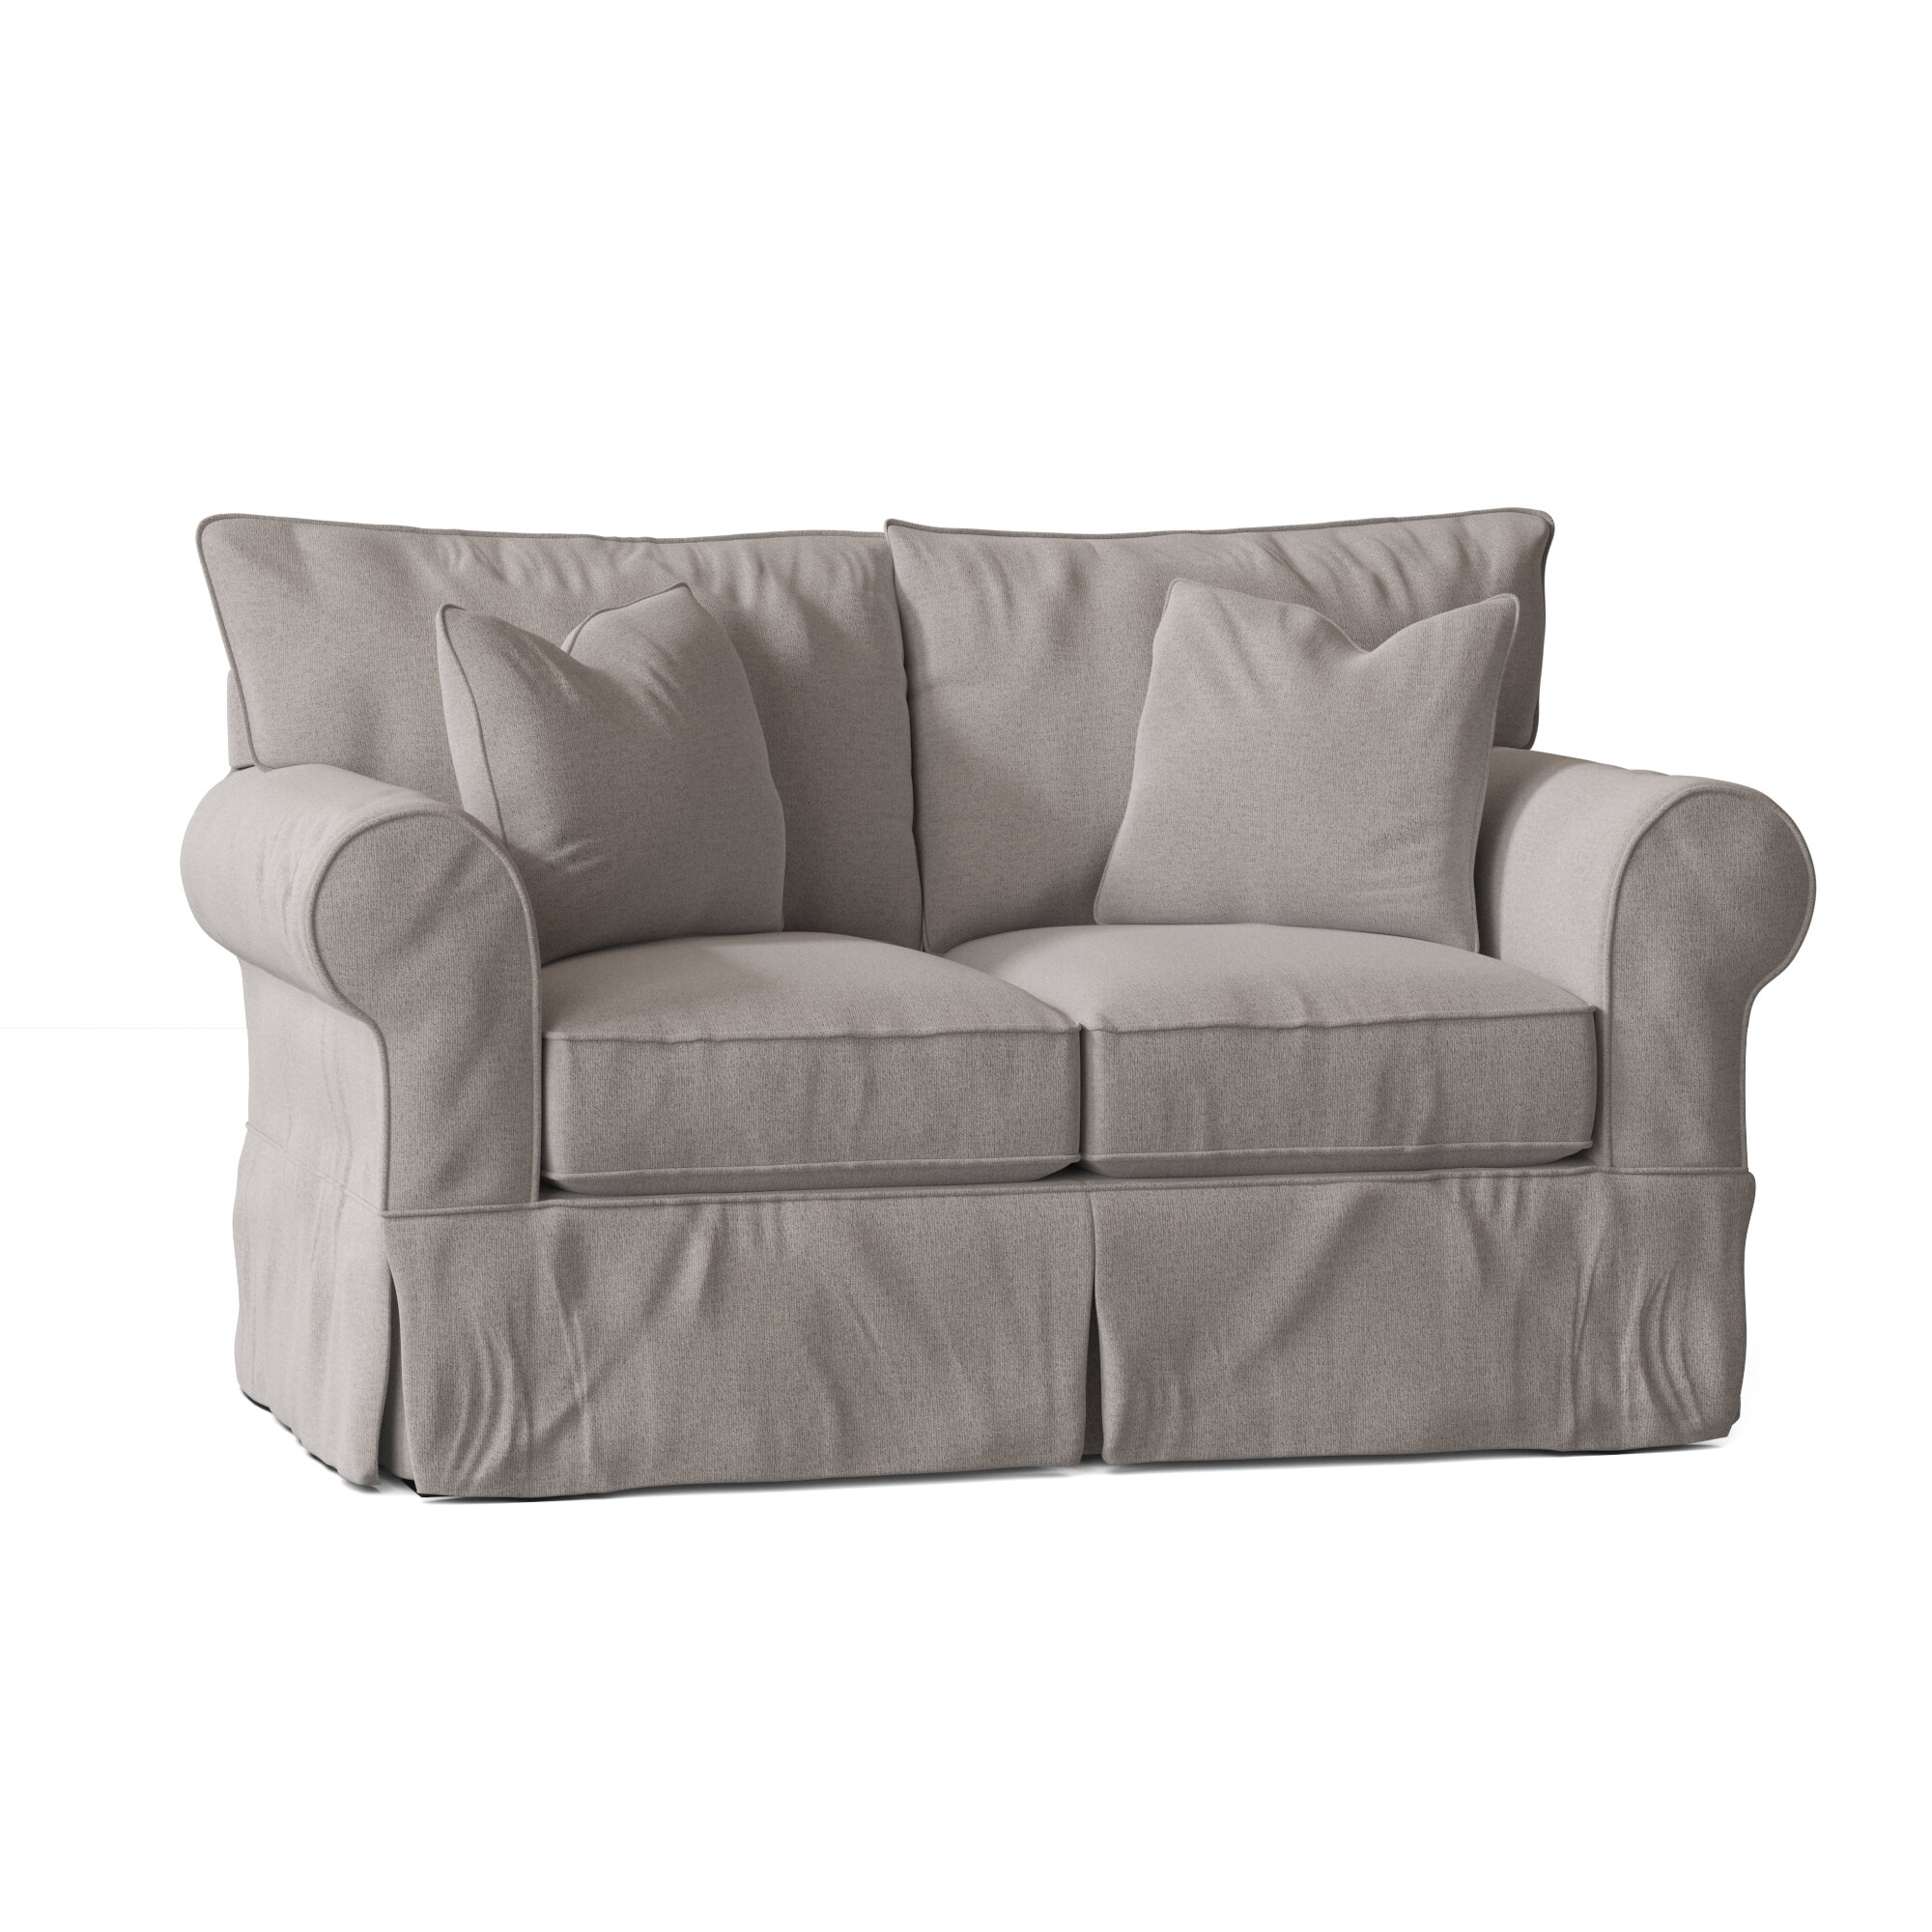 Amari 65” Rolled Arm Slipcovered Loveseat with Reversible Cushions